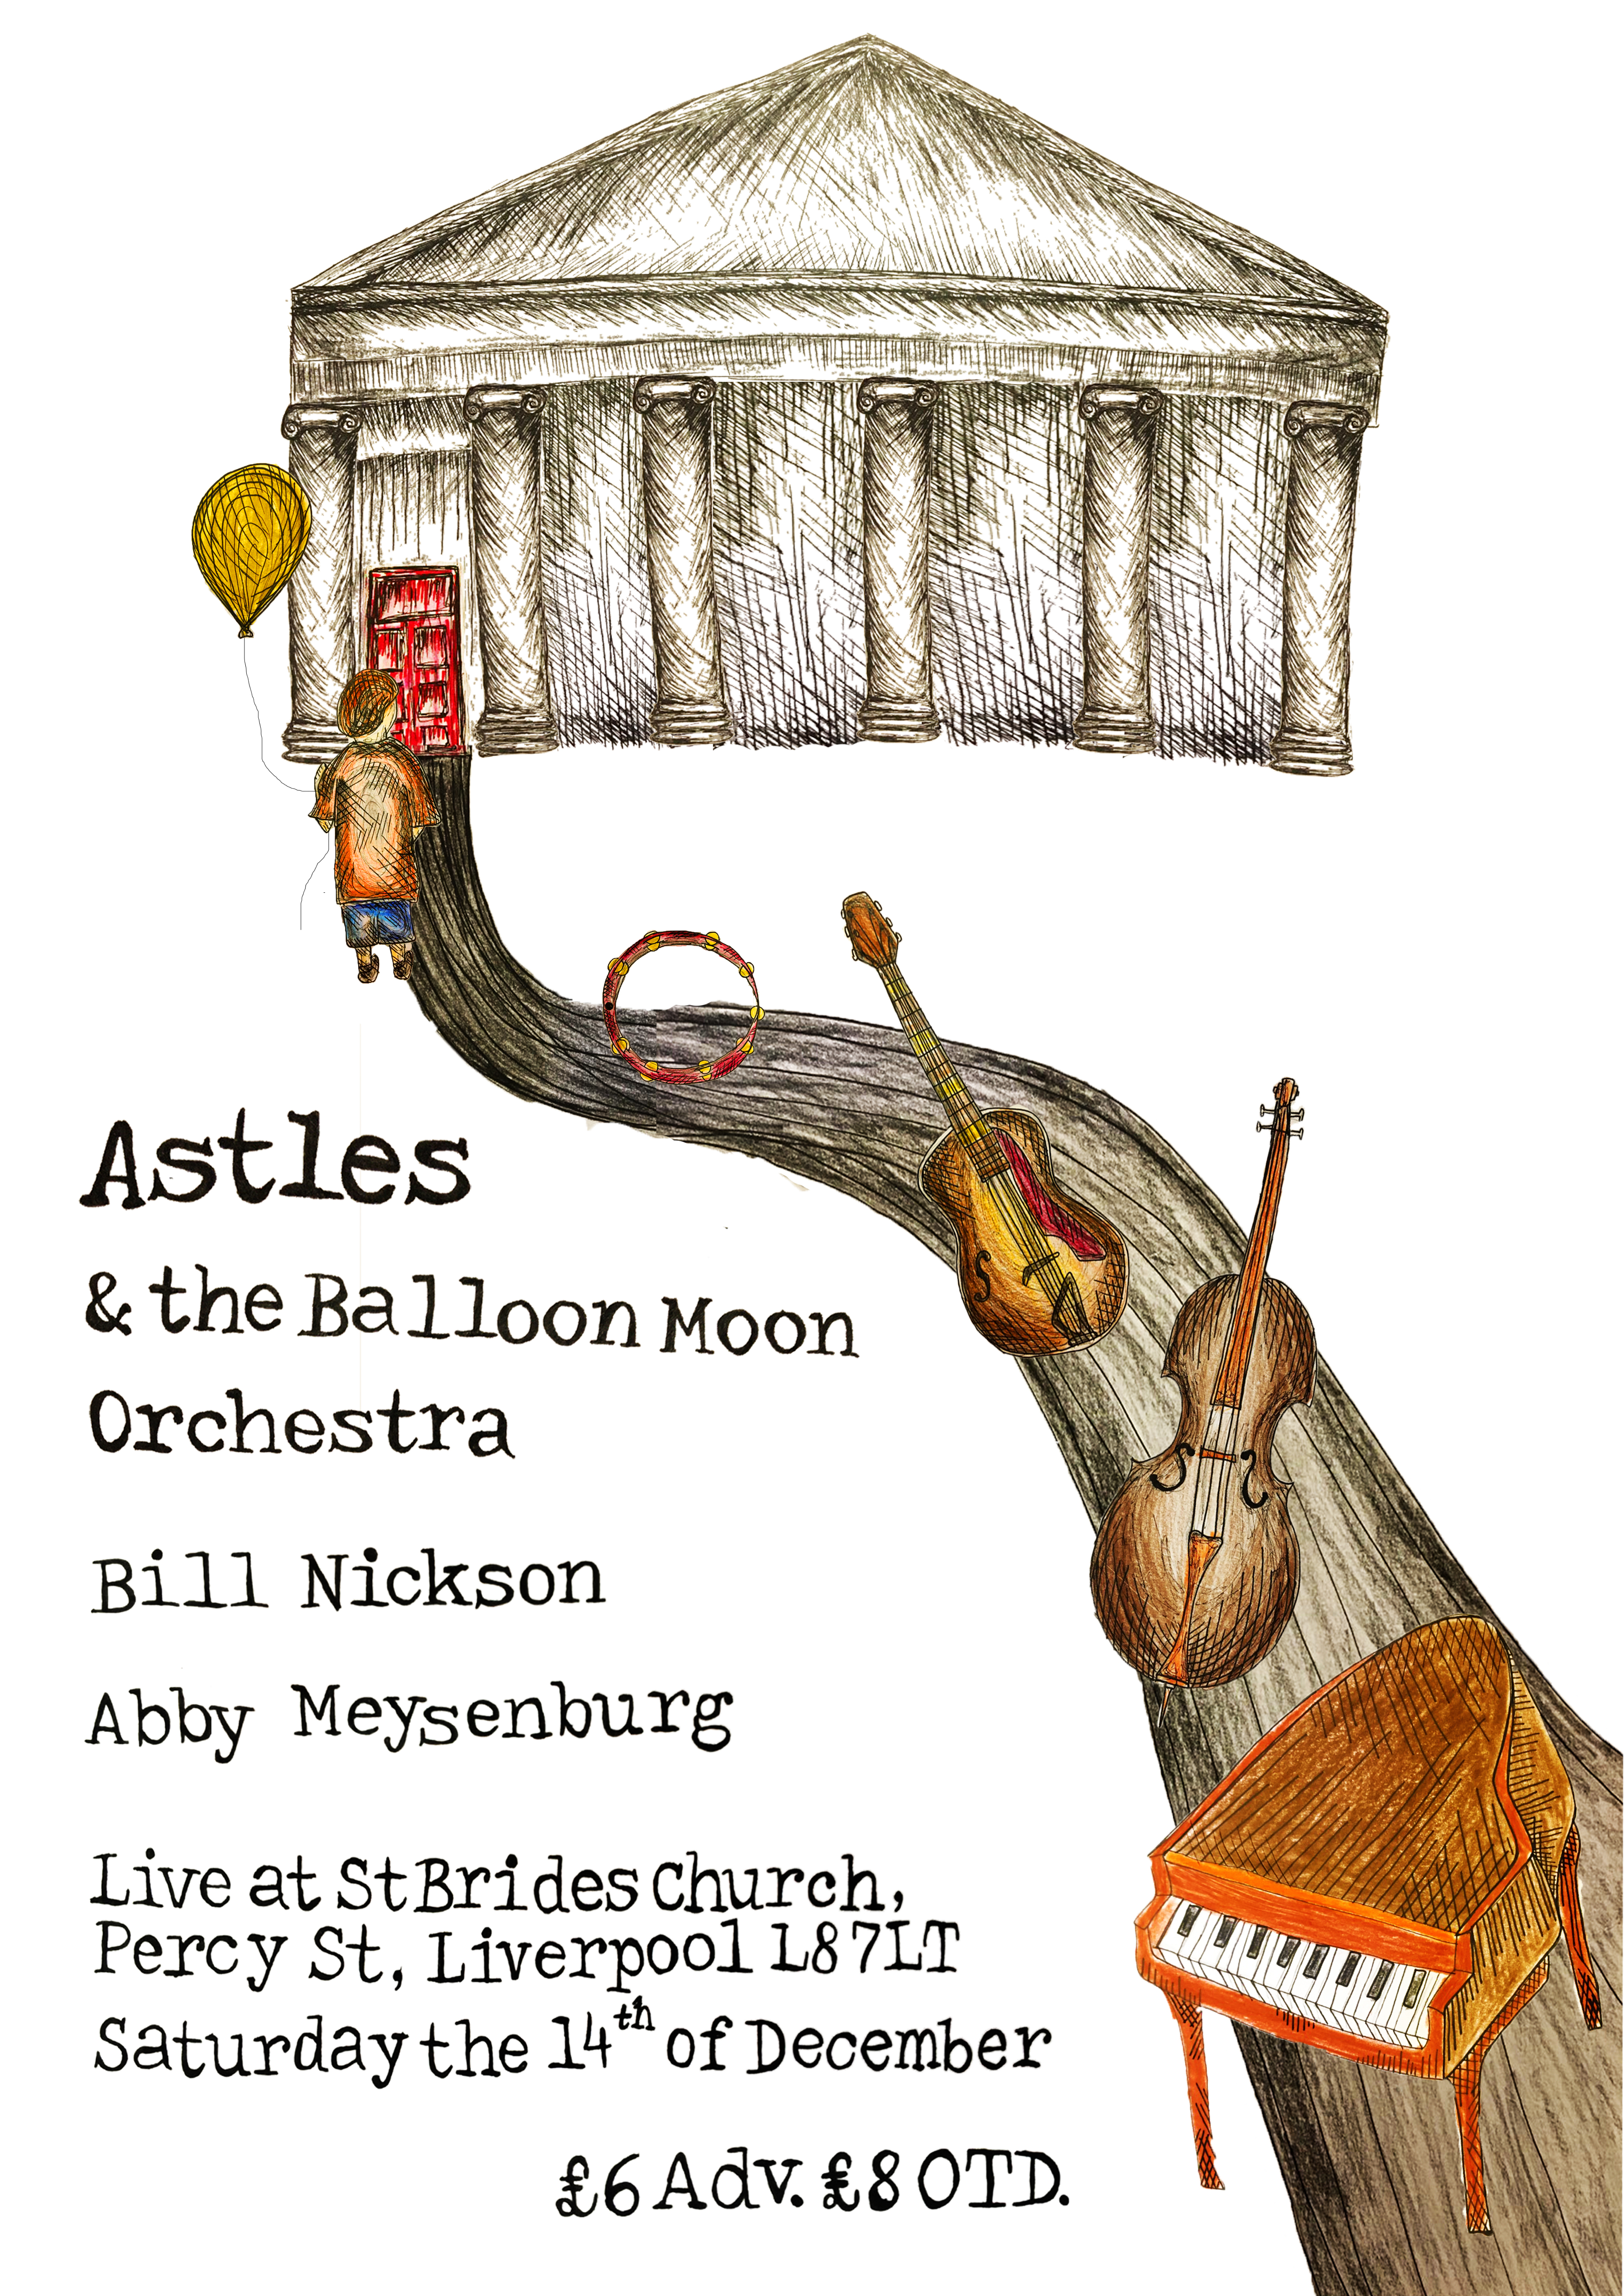 St. Bride’s Church to host a daring night of music with Astles, Bill Nickson & more.